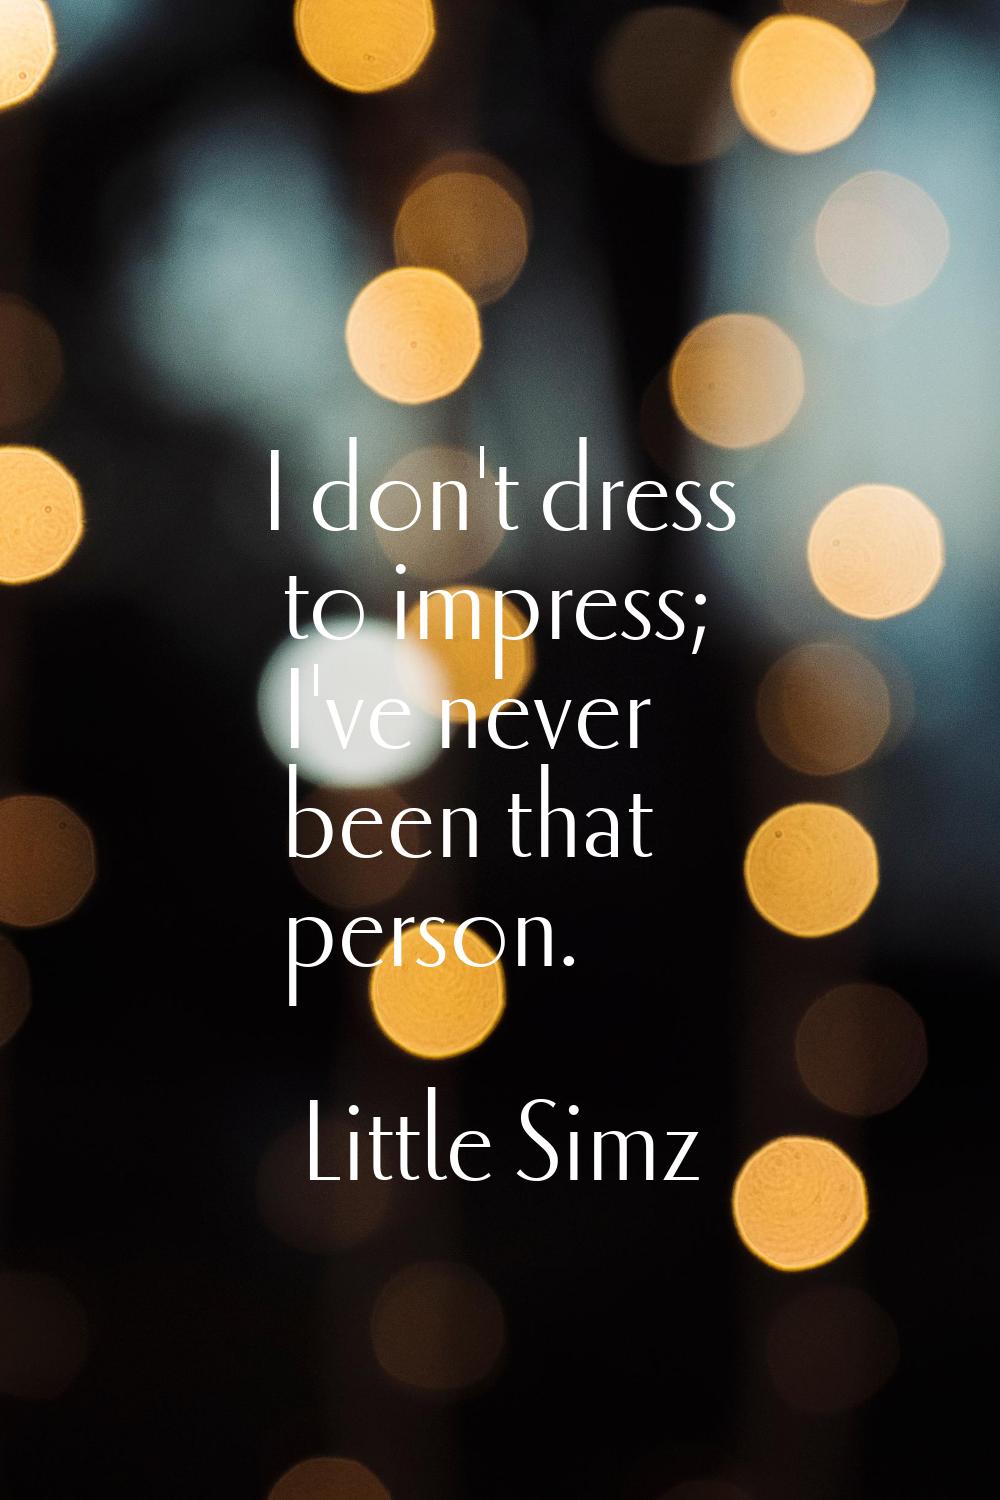 I don't dress to impress; I've never been that person.